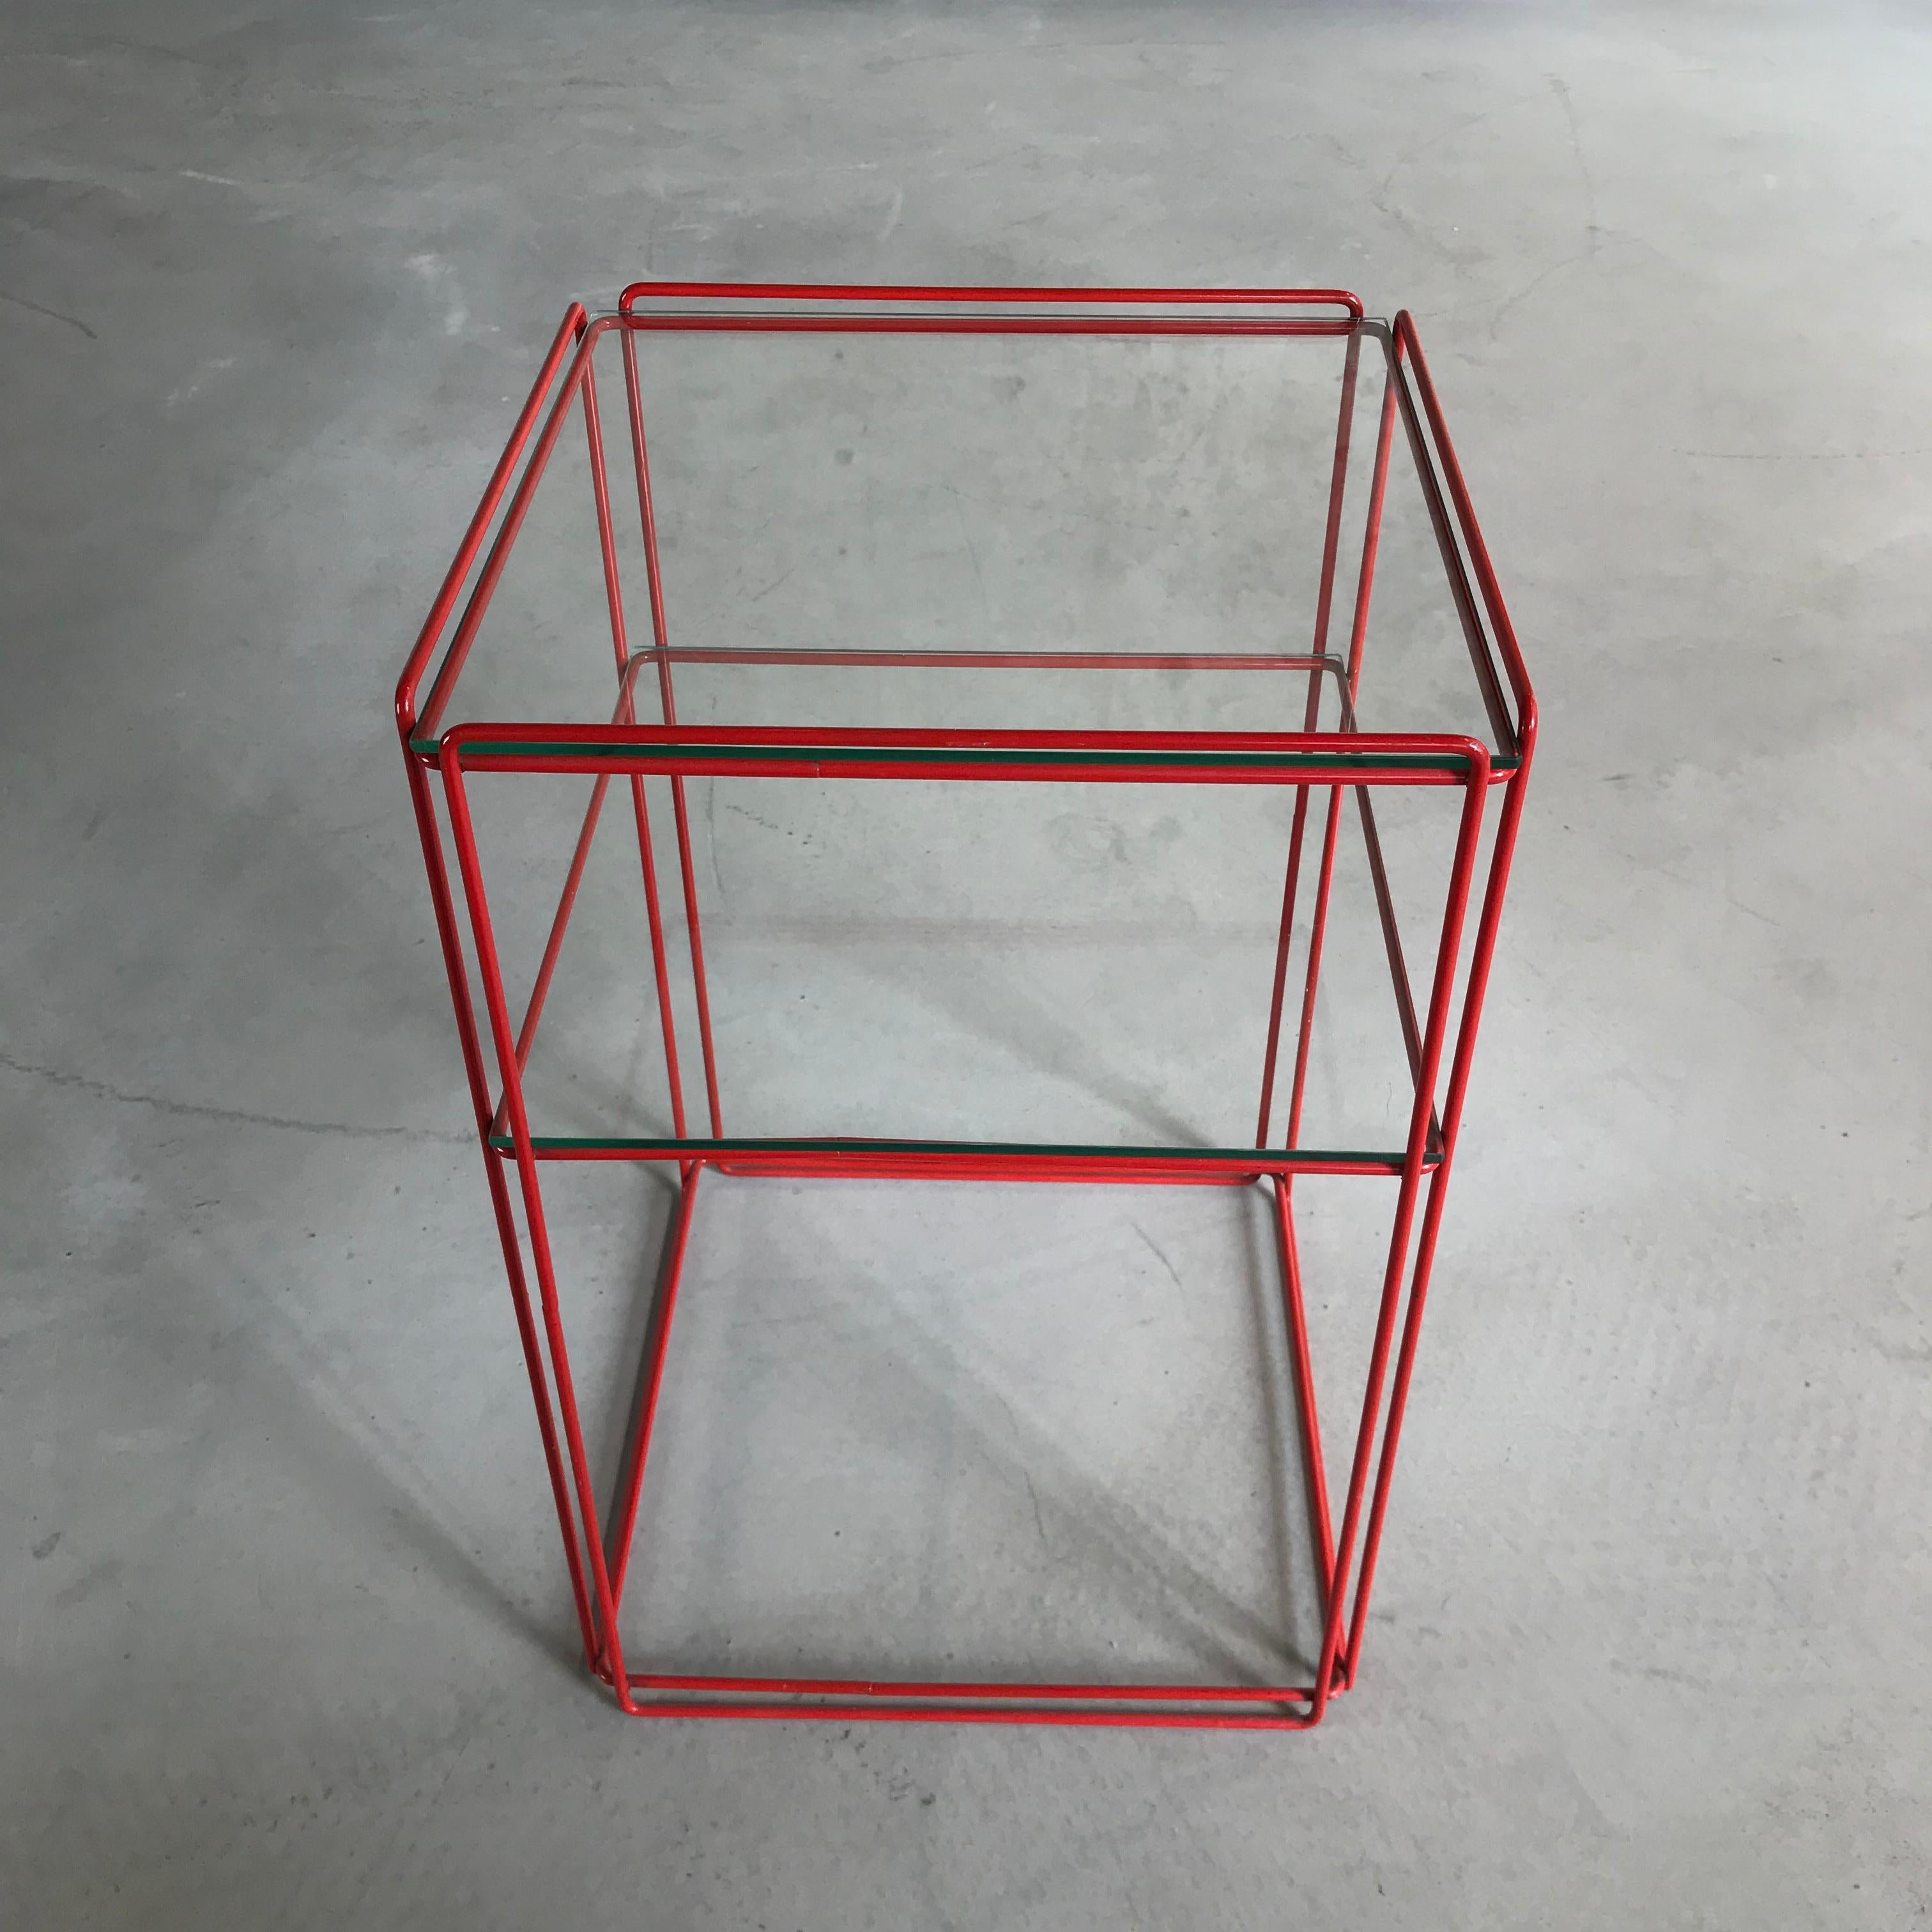 Beautiful, graphical and Minimalist design by Max Sauze for Max Sauze Studio or Atrow, circa 1970. This table features a red colored metal base and two glass 'shelves'. The glass and metal wire structure gives this table a very transparent, minimal